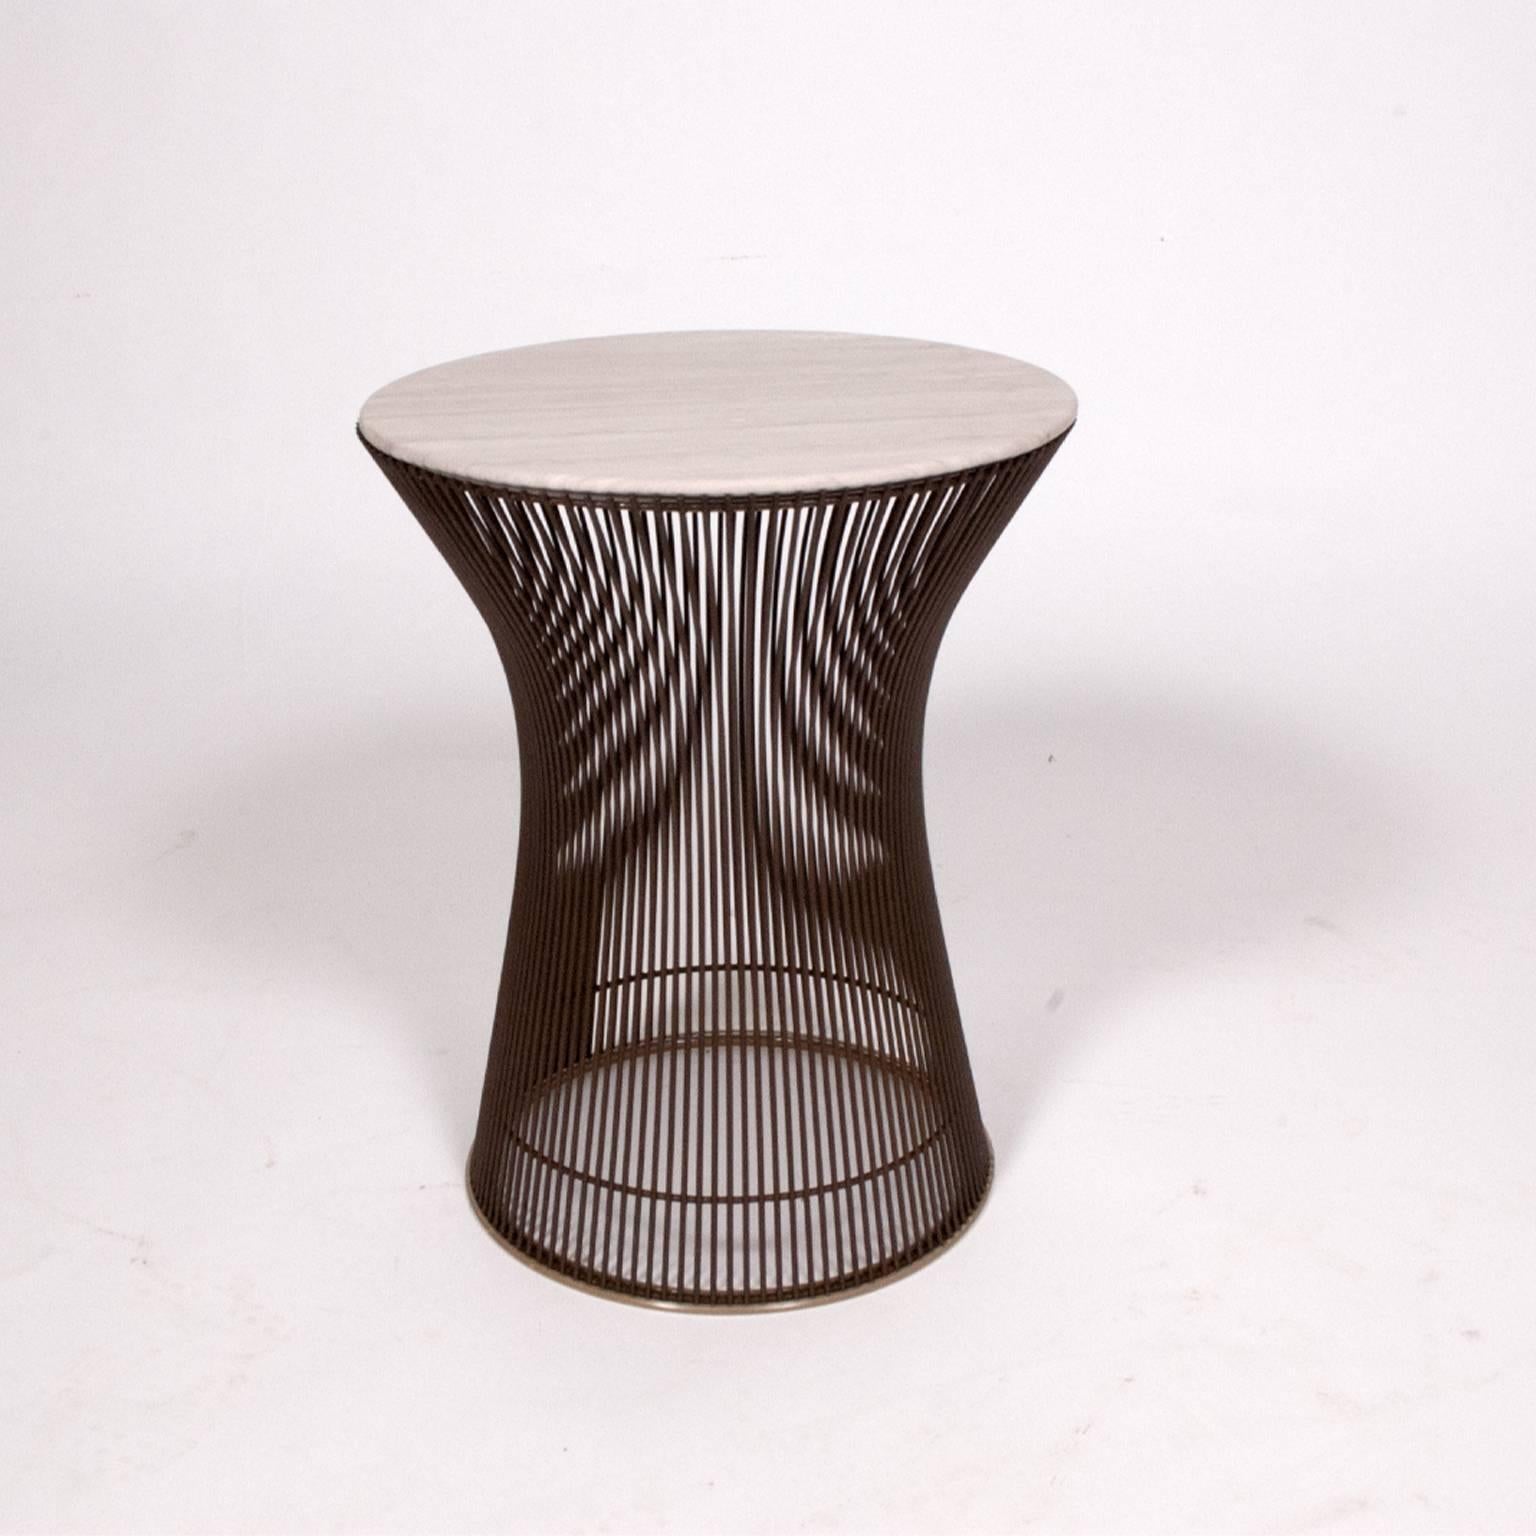 Platner side table with limestone top.  Made by Knoll.